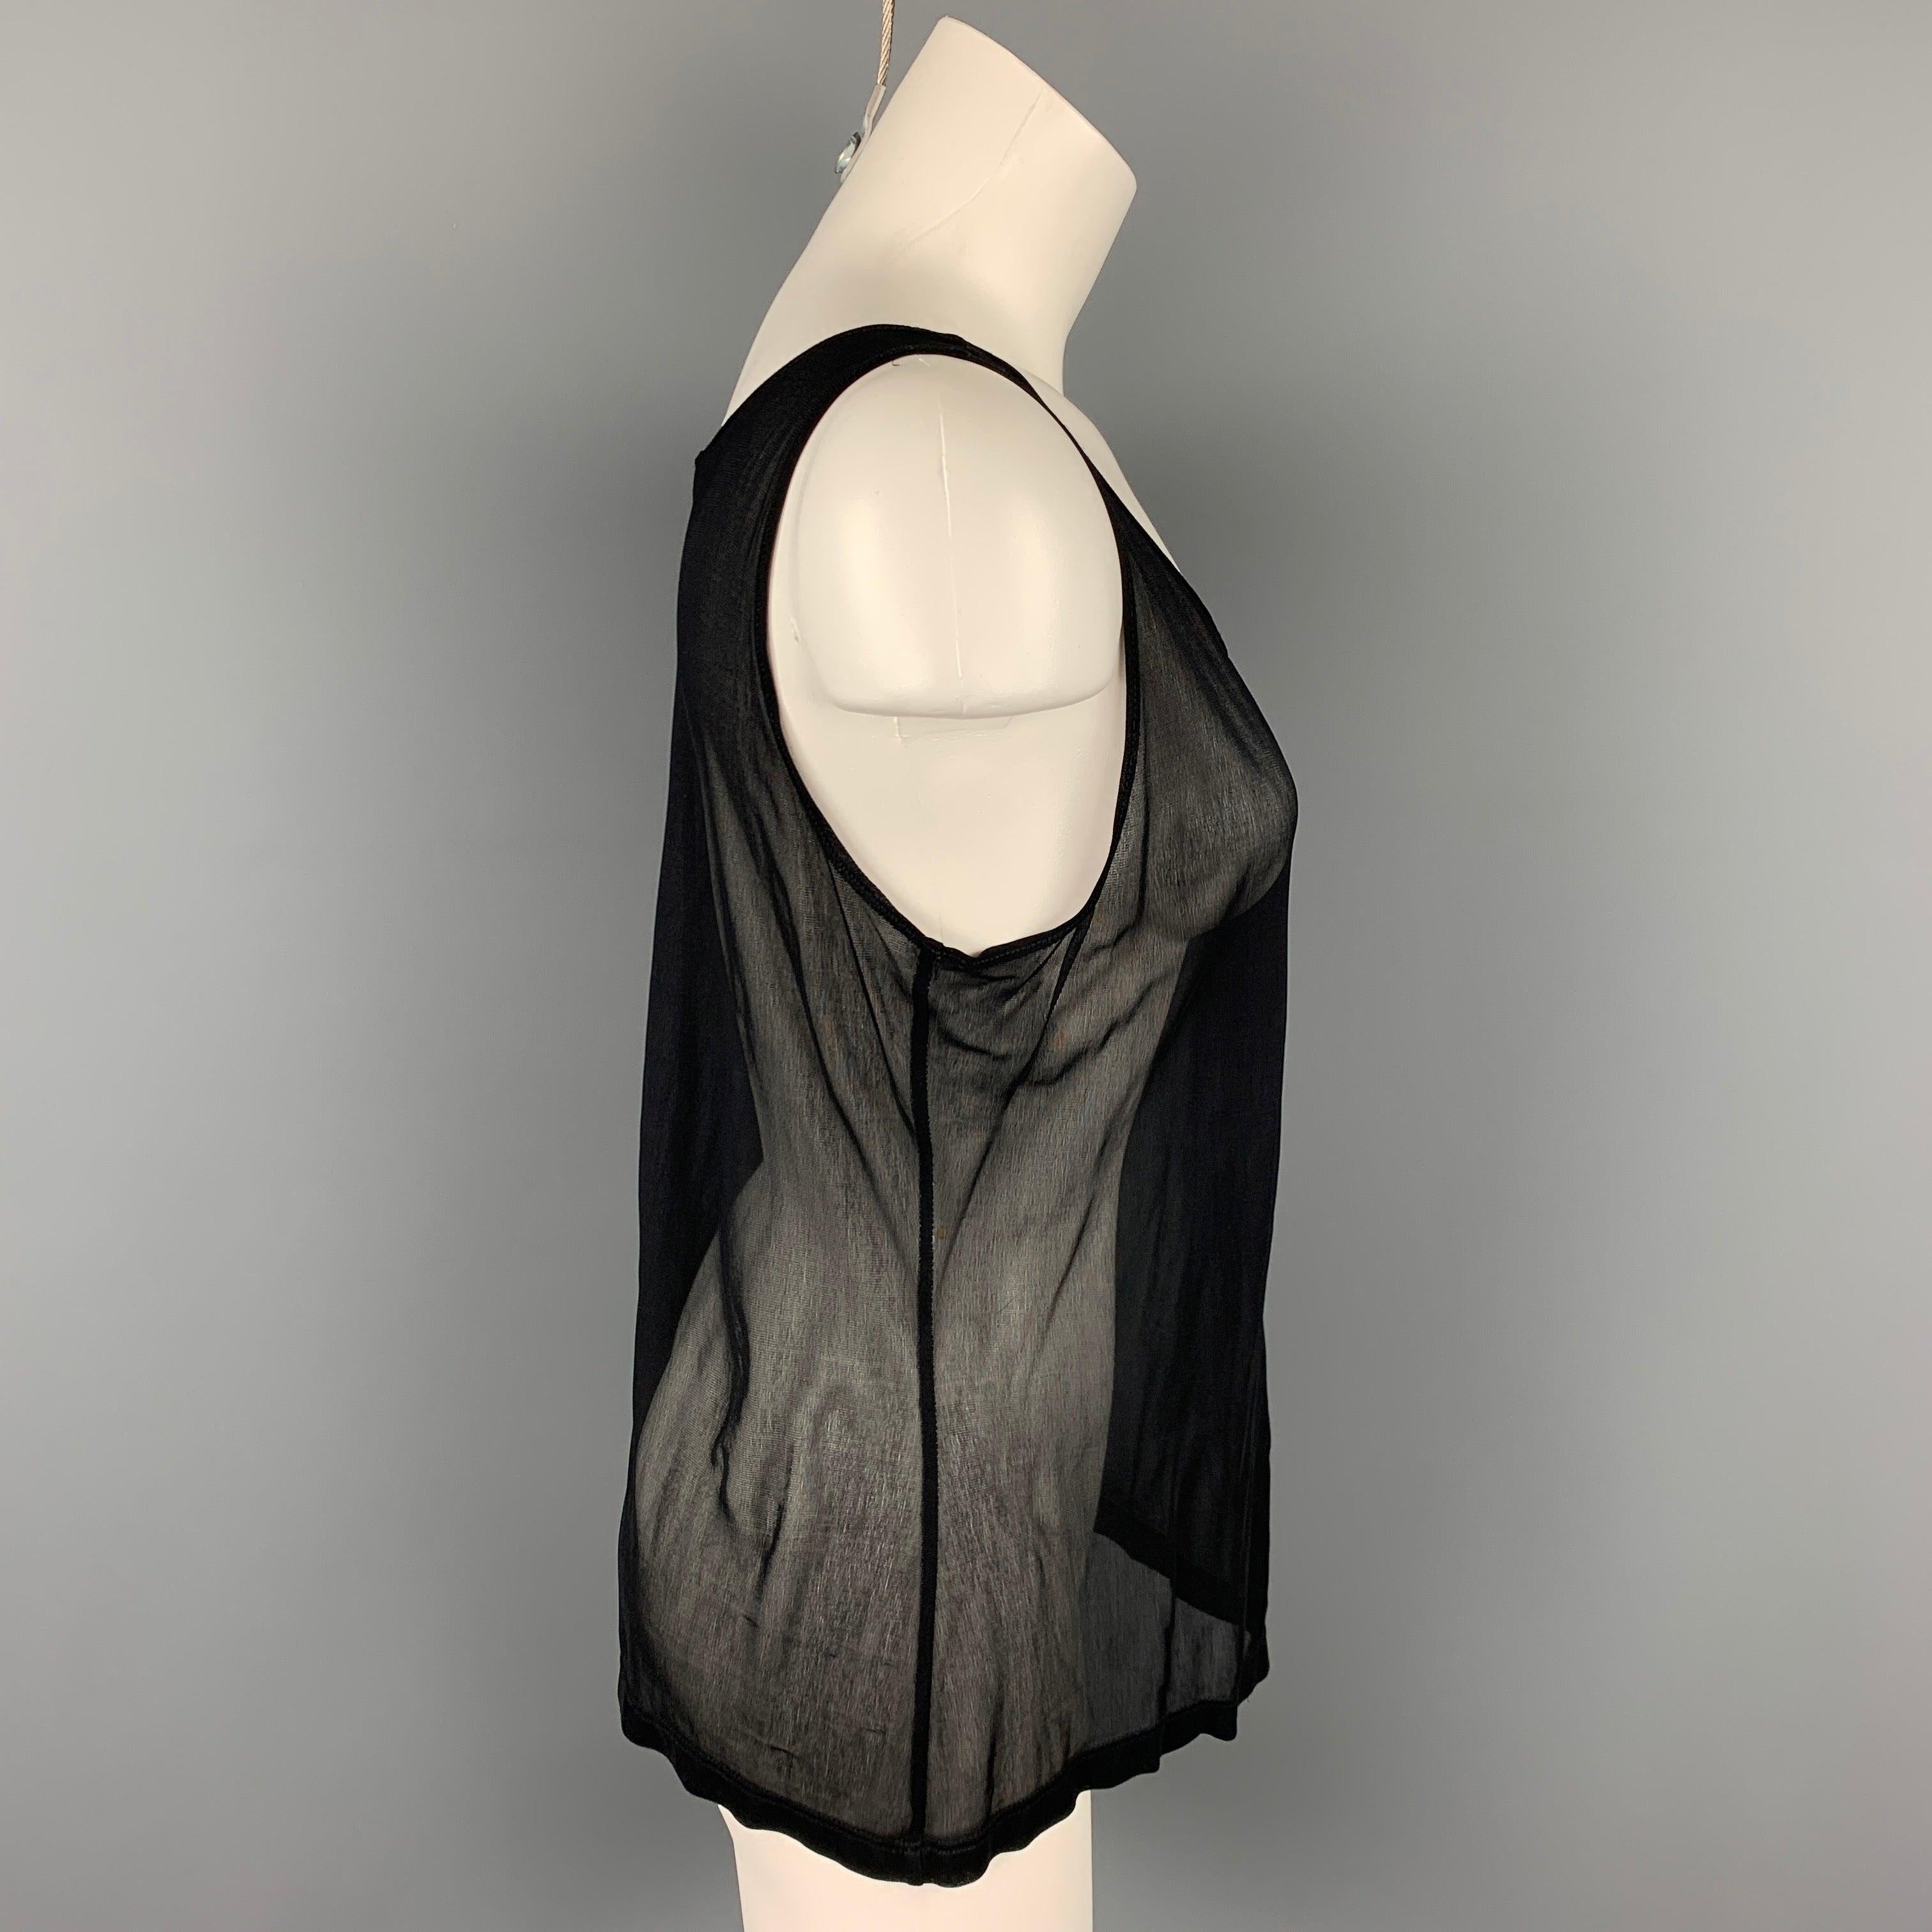 CALVIN KLEIN COLLECTION tank top black mesh viscose featuring a deep neck. Made in USA.Very Good Pre-Owned Condition. 

Marked:   M 

Measurements: 
  Bust: 36 inches  Length: 20.5 inches  
  
  
 
Reference: 107040
Category: T-Shirt - Womens
More